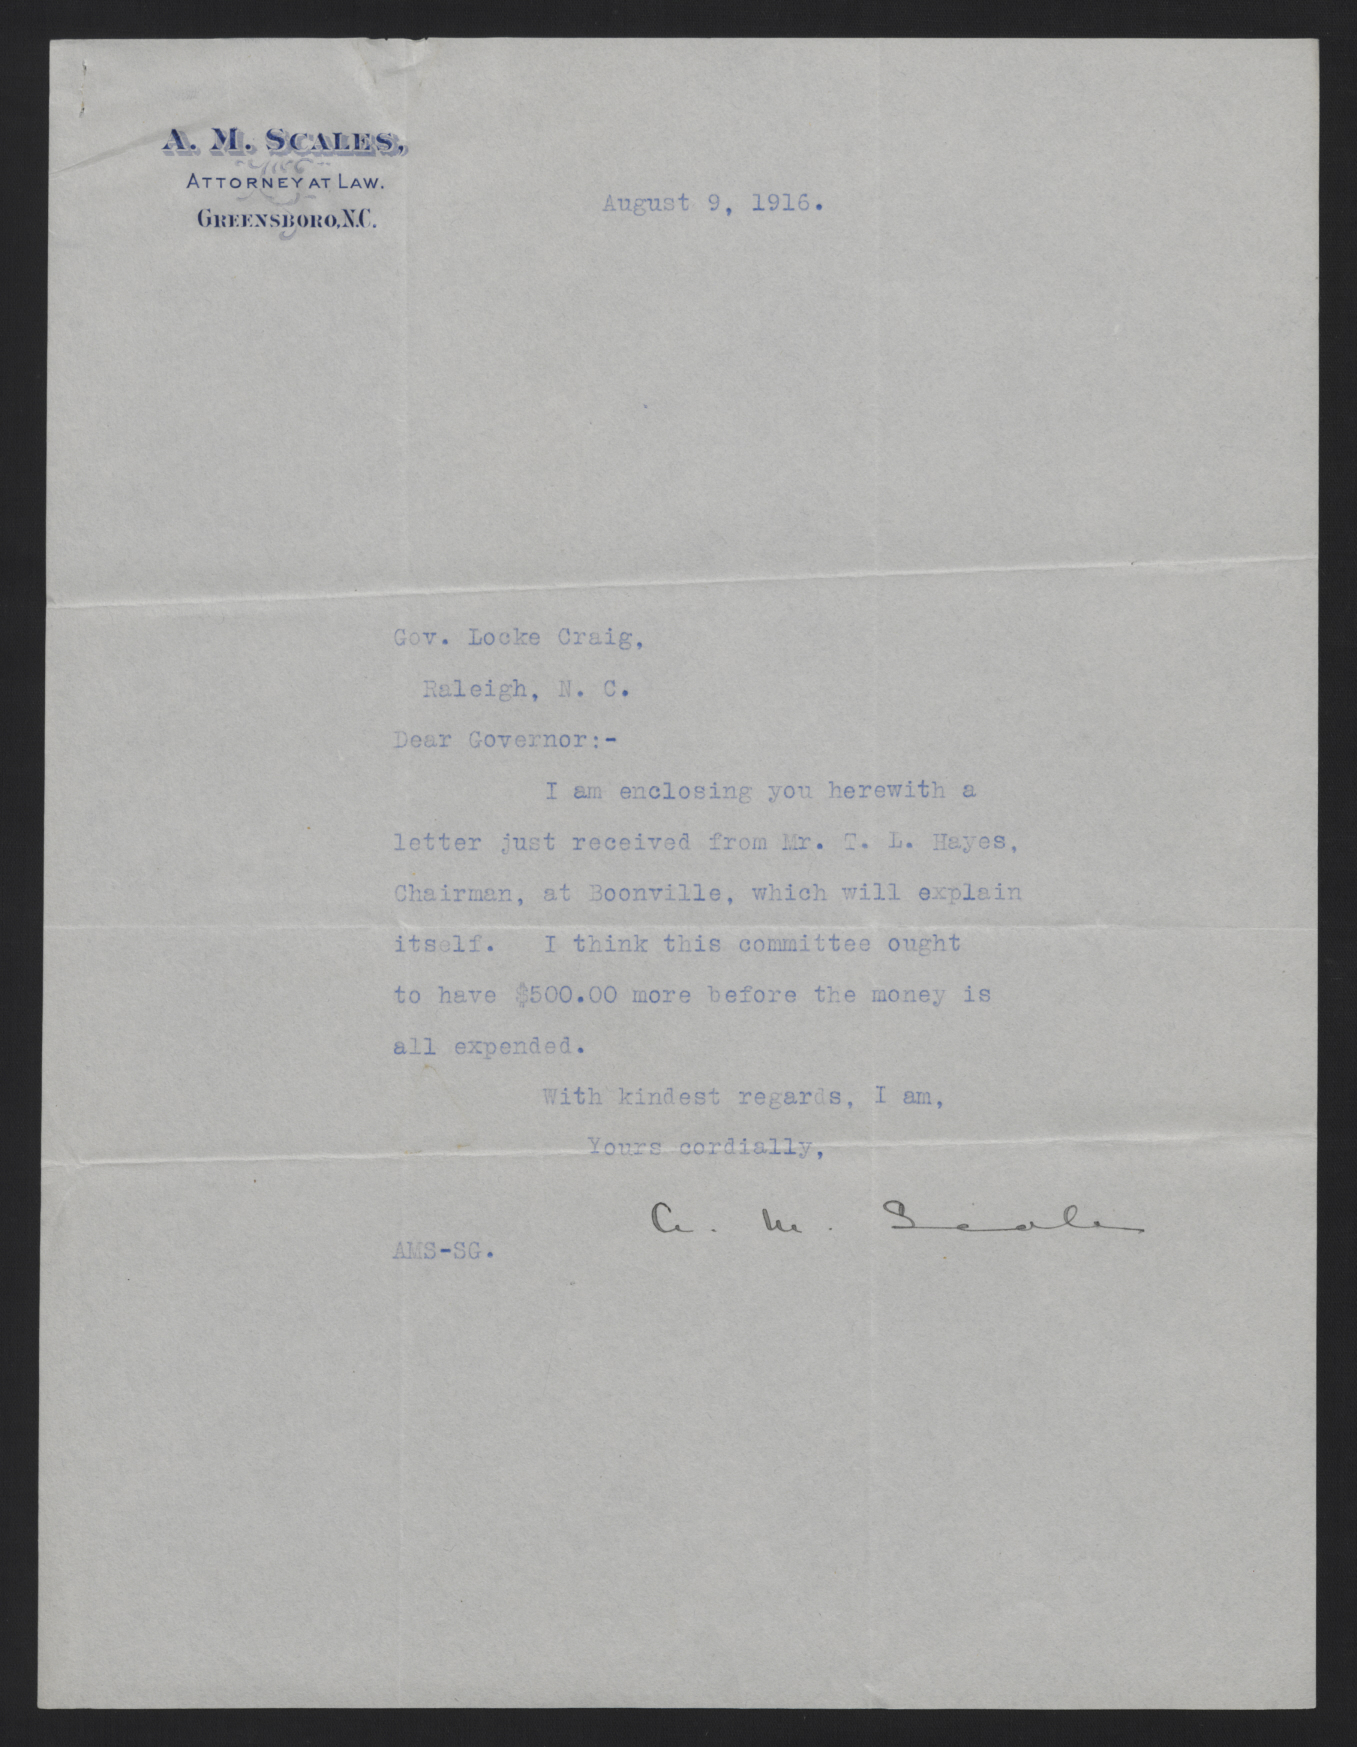 Letter from Scales to Craig, August 9, 1916